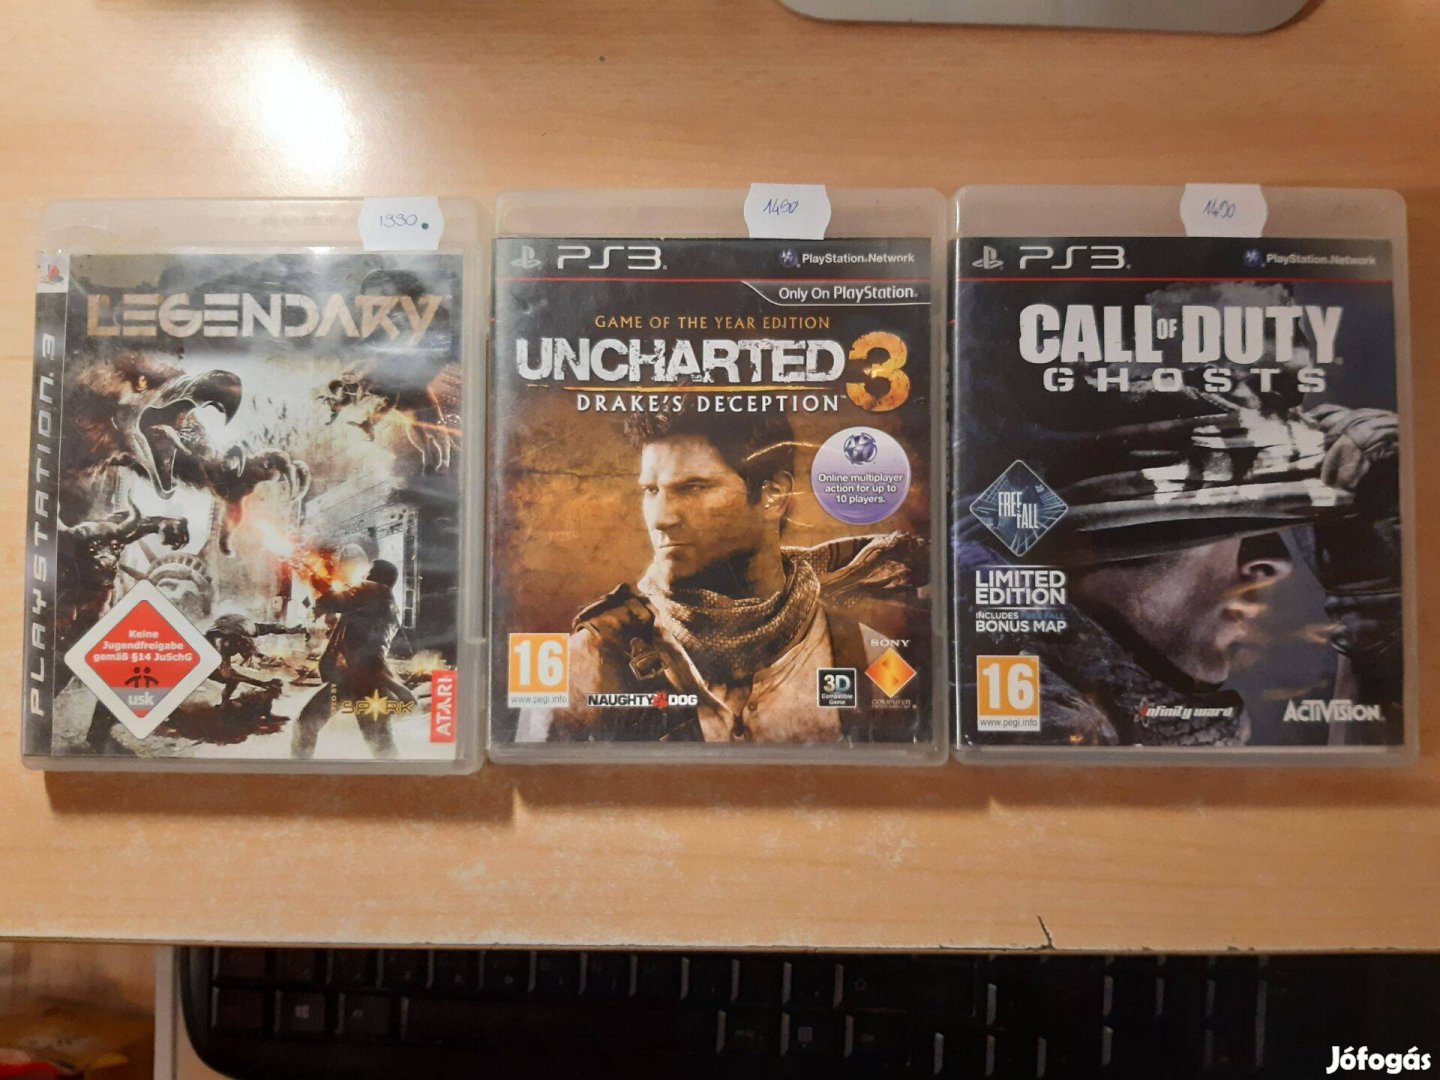 PS3 Legendary, Uncharted 3, Call of Duty Ghosts Playstation 3 játékok